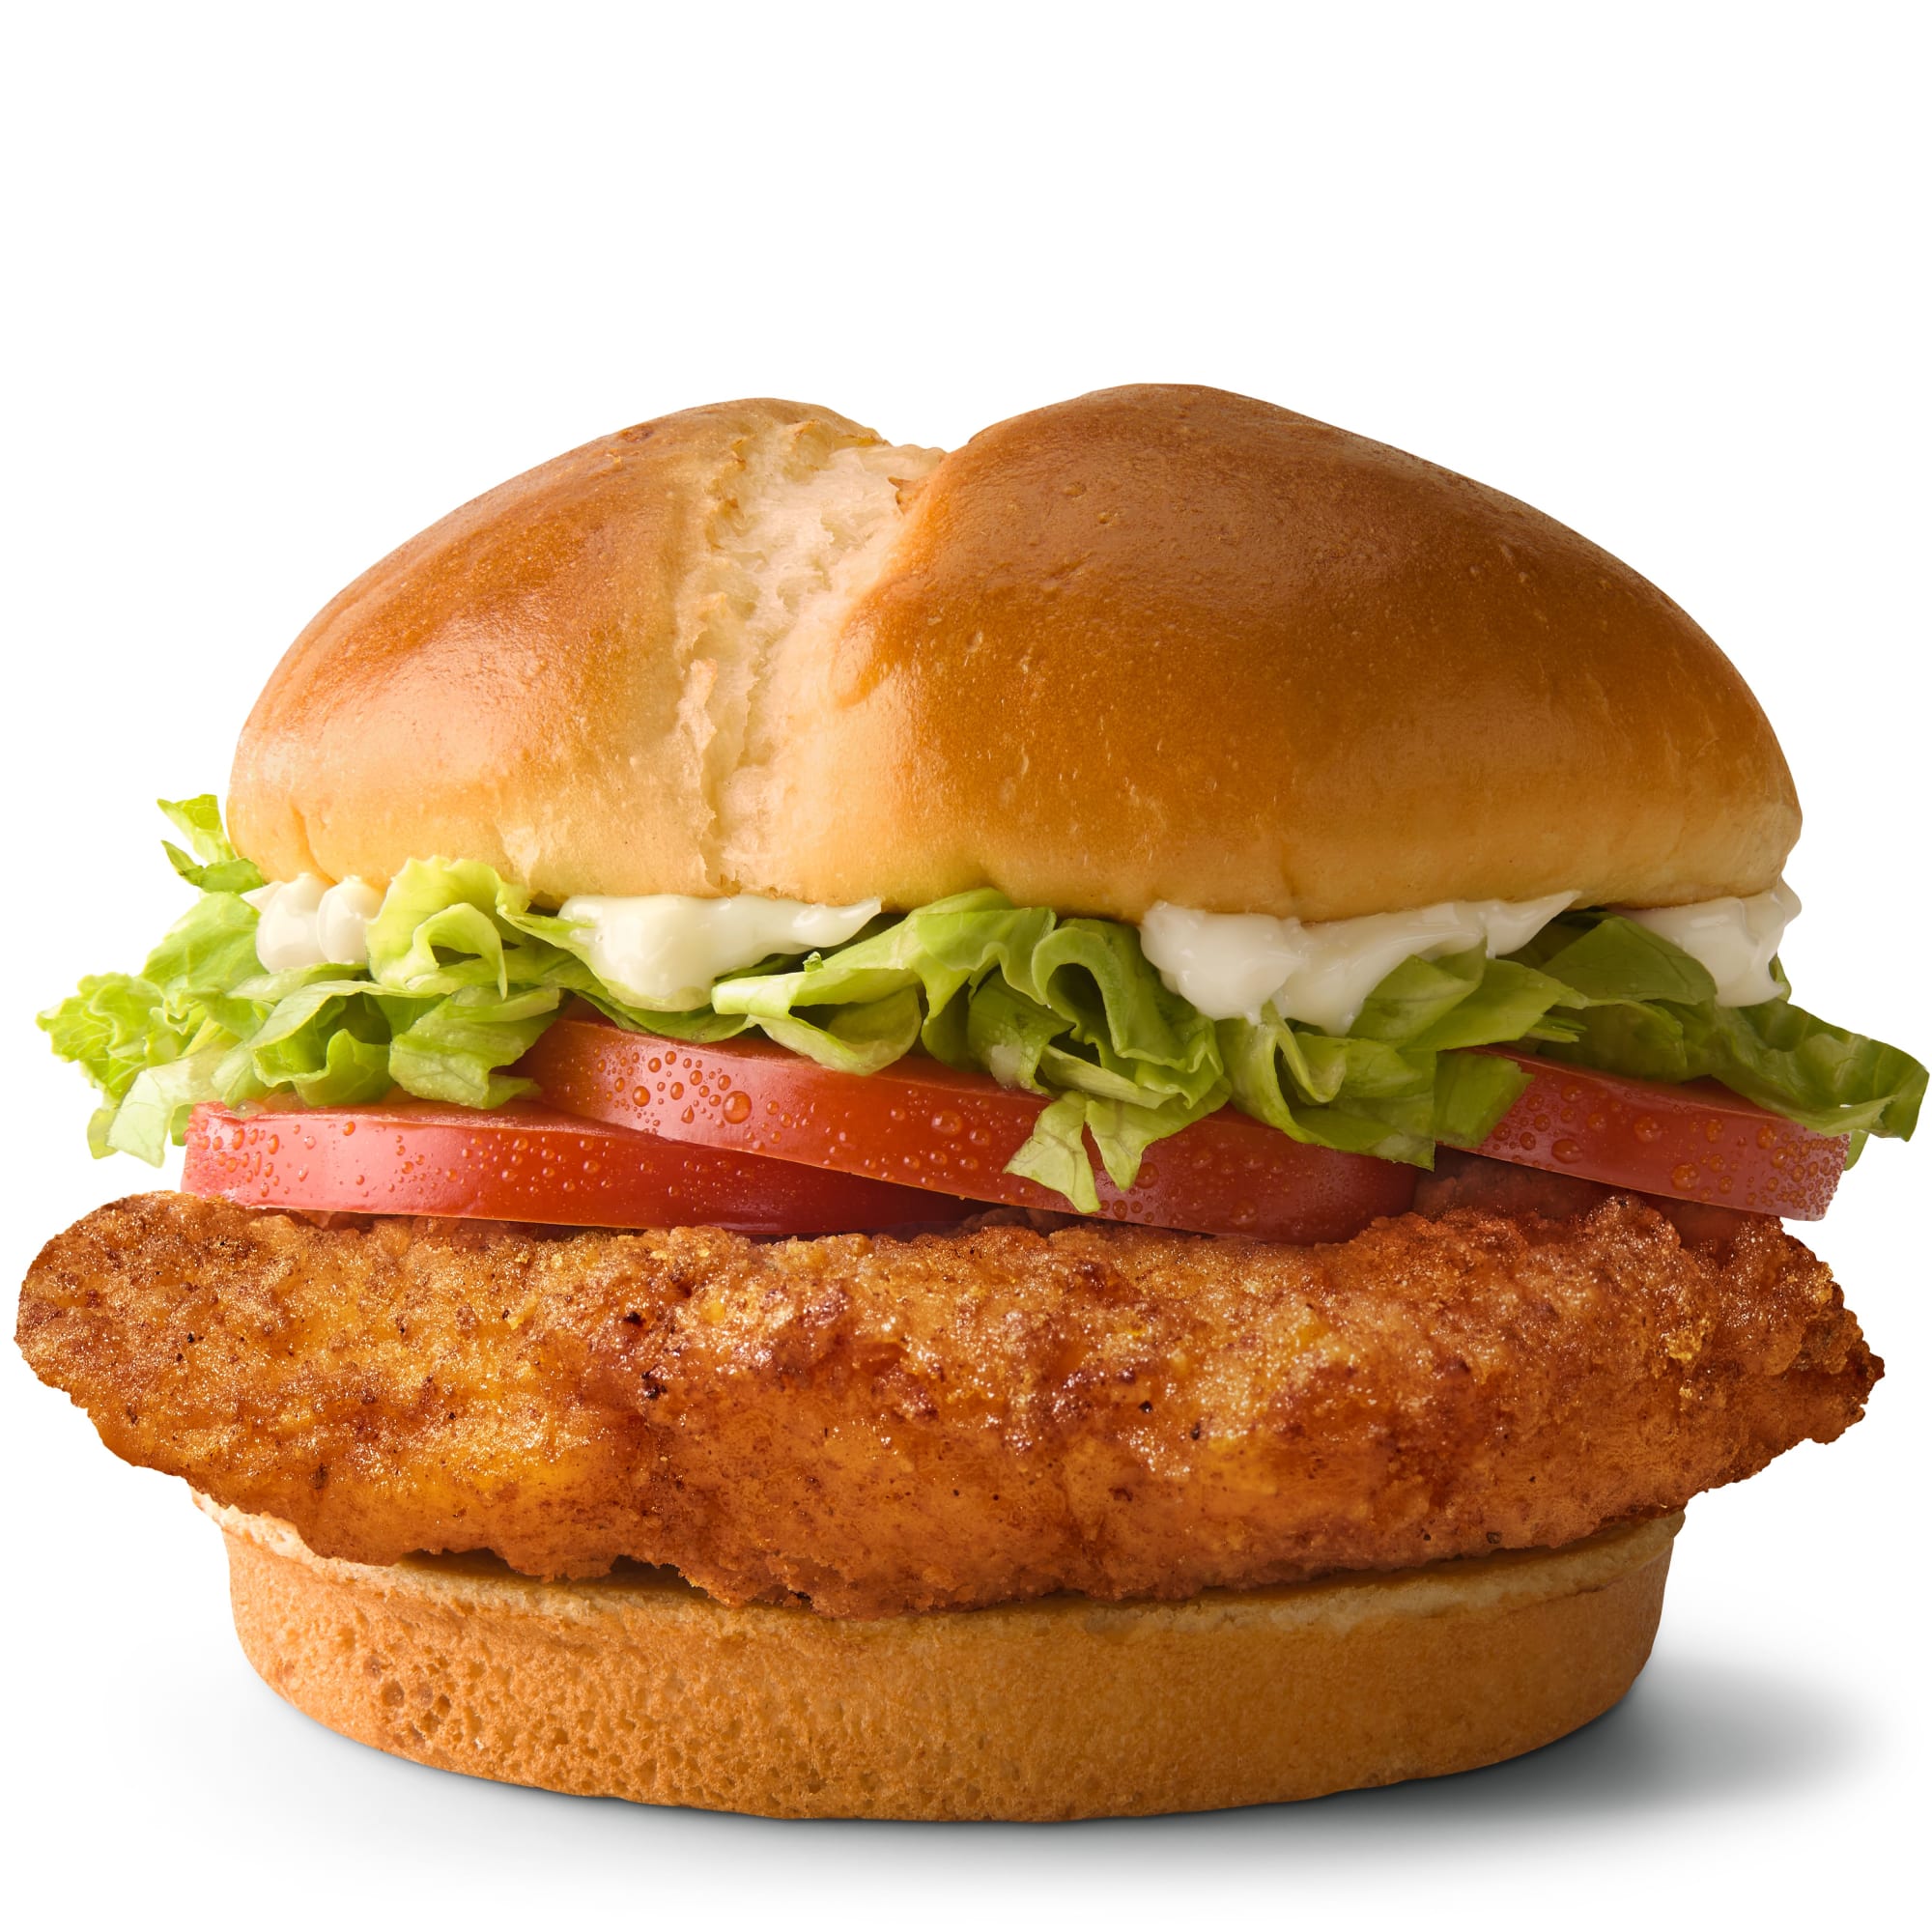 Can you get an first taste of the McDonald’s new Crispy Chicken Sandwich?